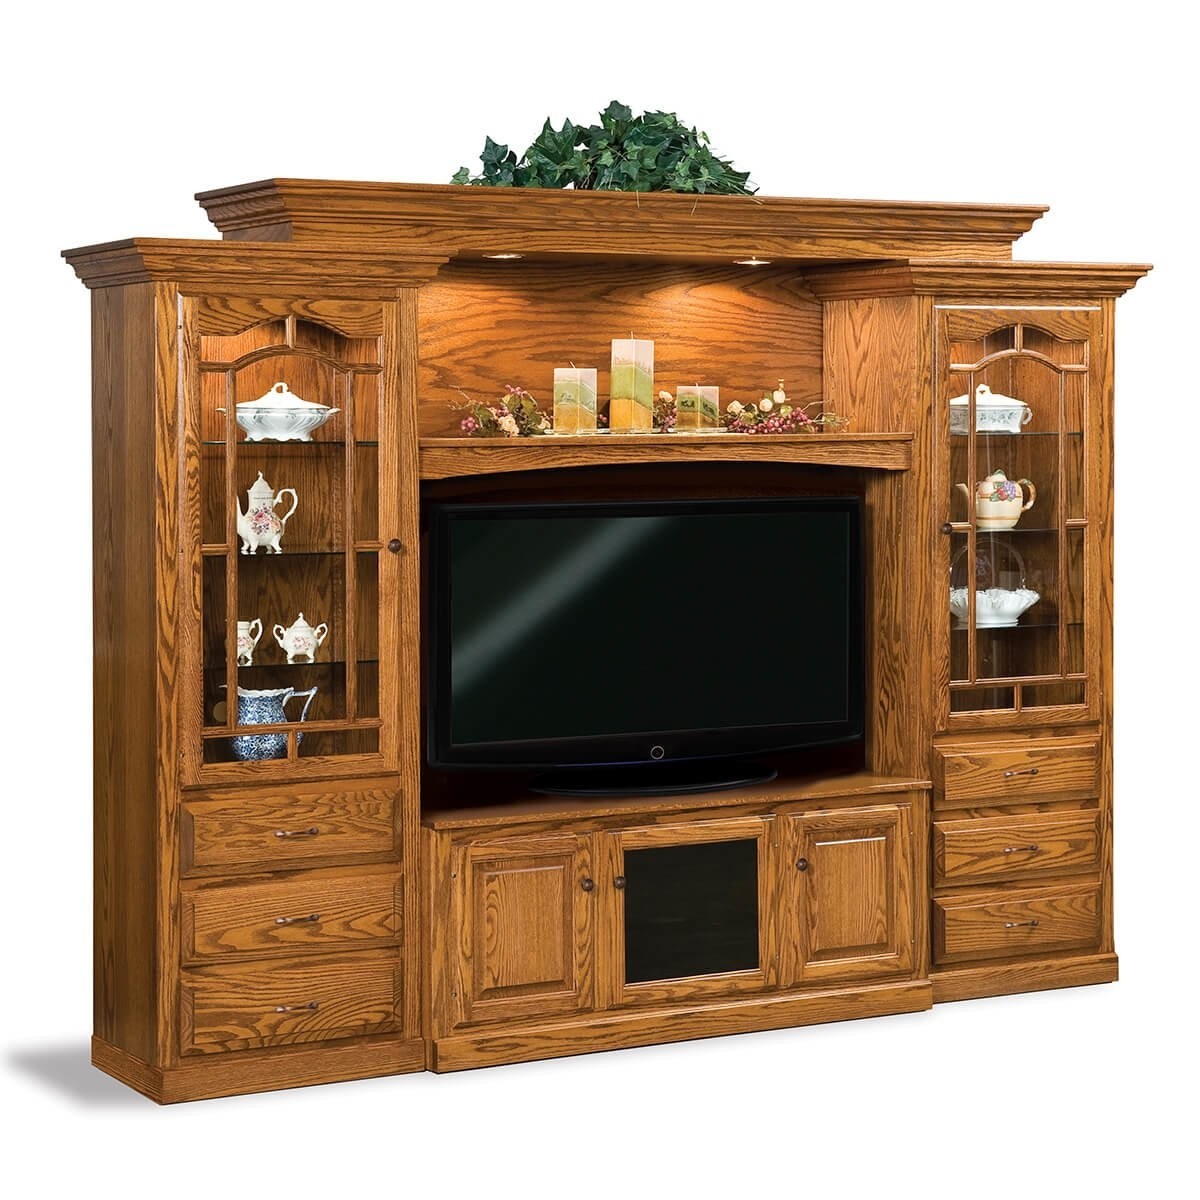 Amish Tv Entertainment Center Solid Oak Wood Media Wall Unit Cabinet Storage New